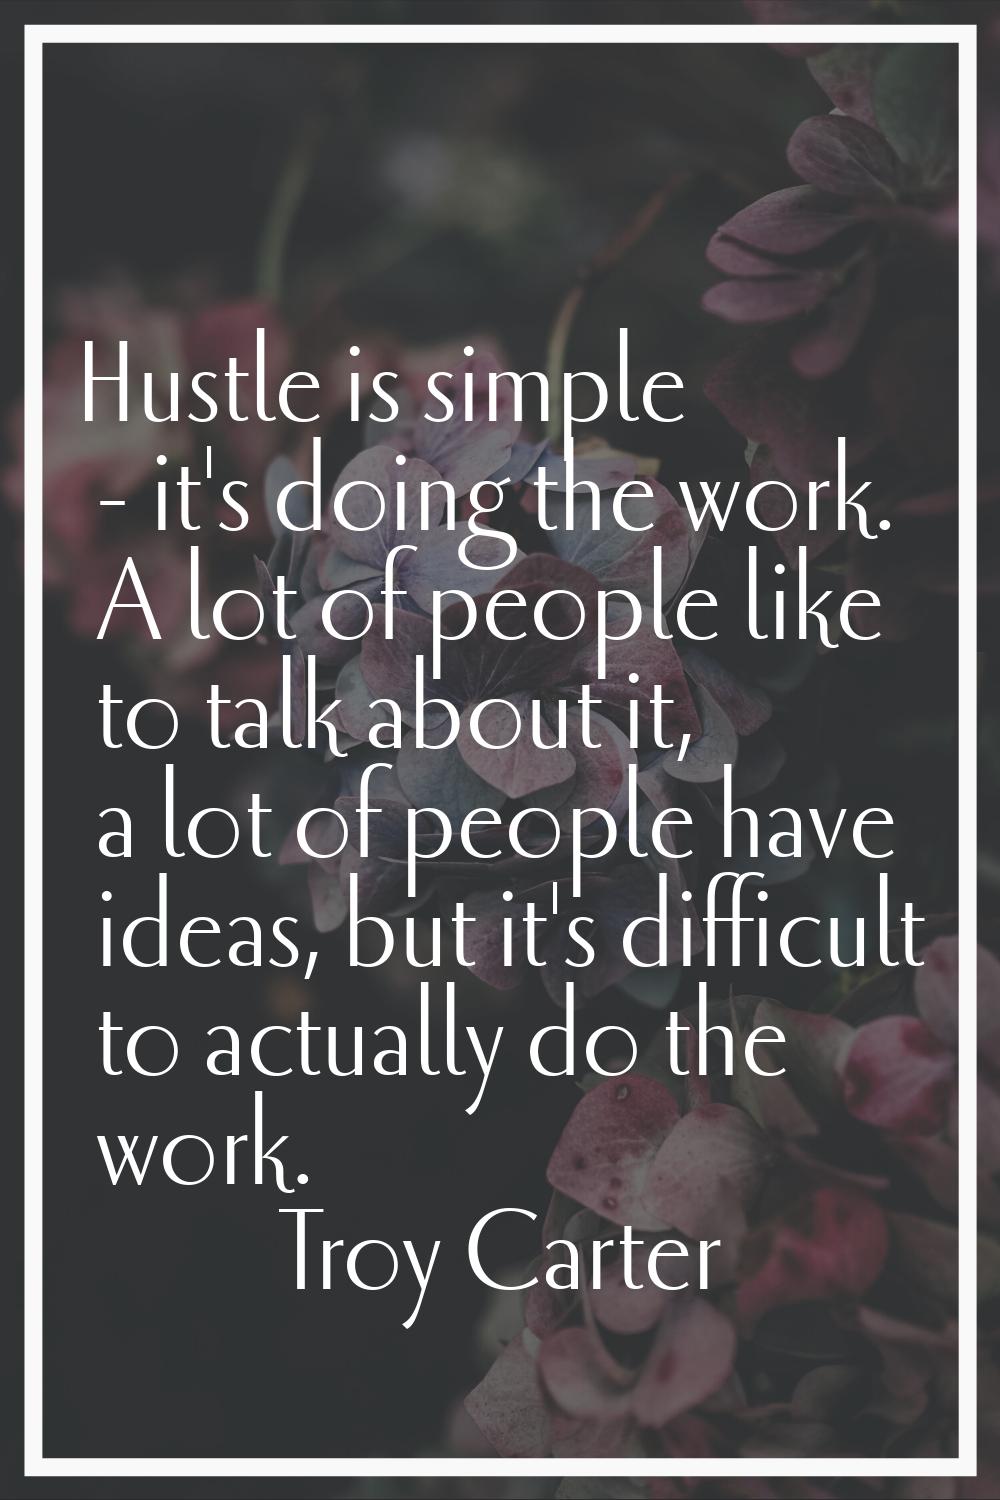 Hustle is simple - it's doing the work. A lot of people like to talk about it, a lot of people have